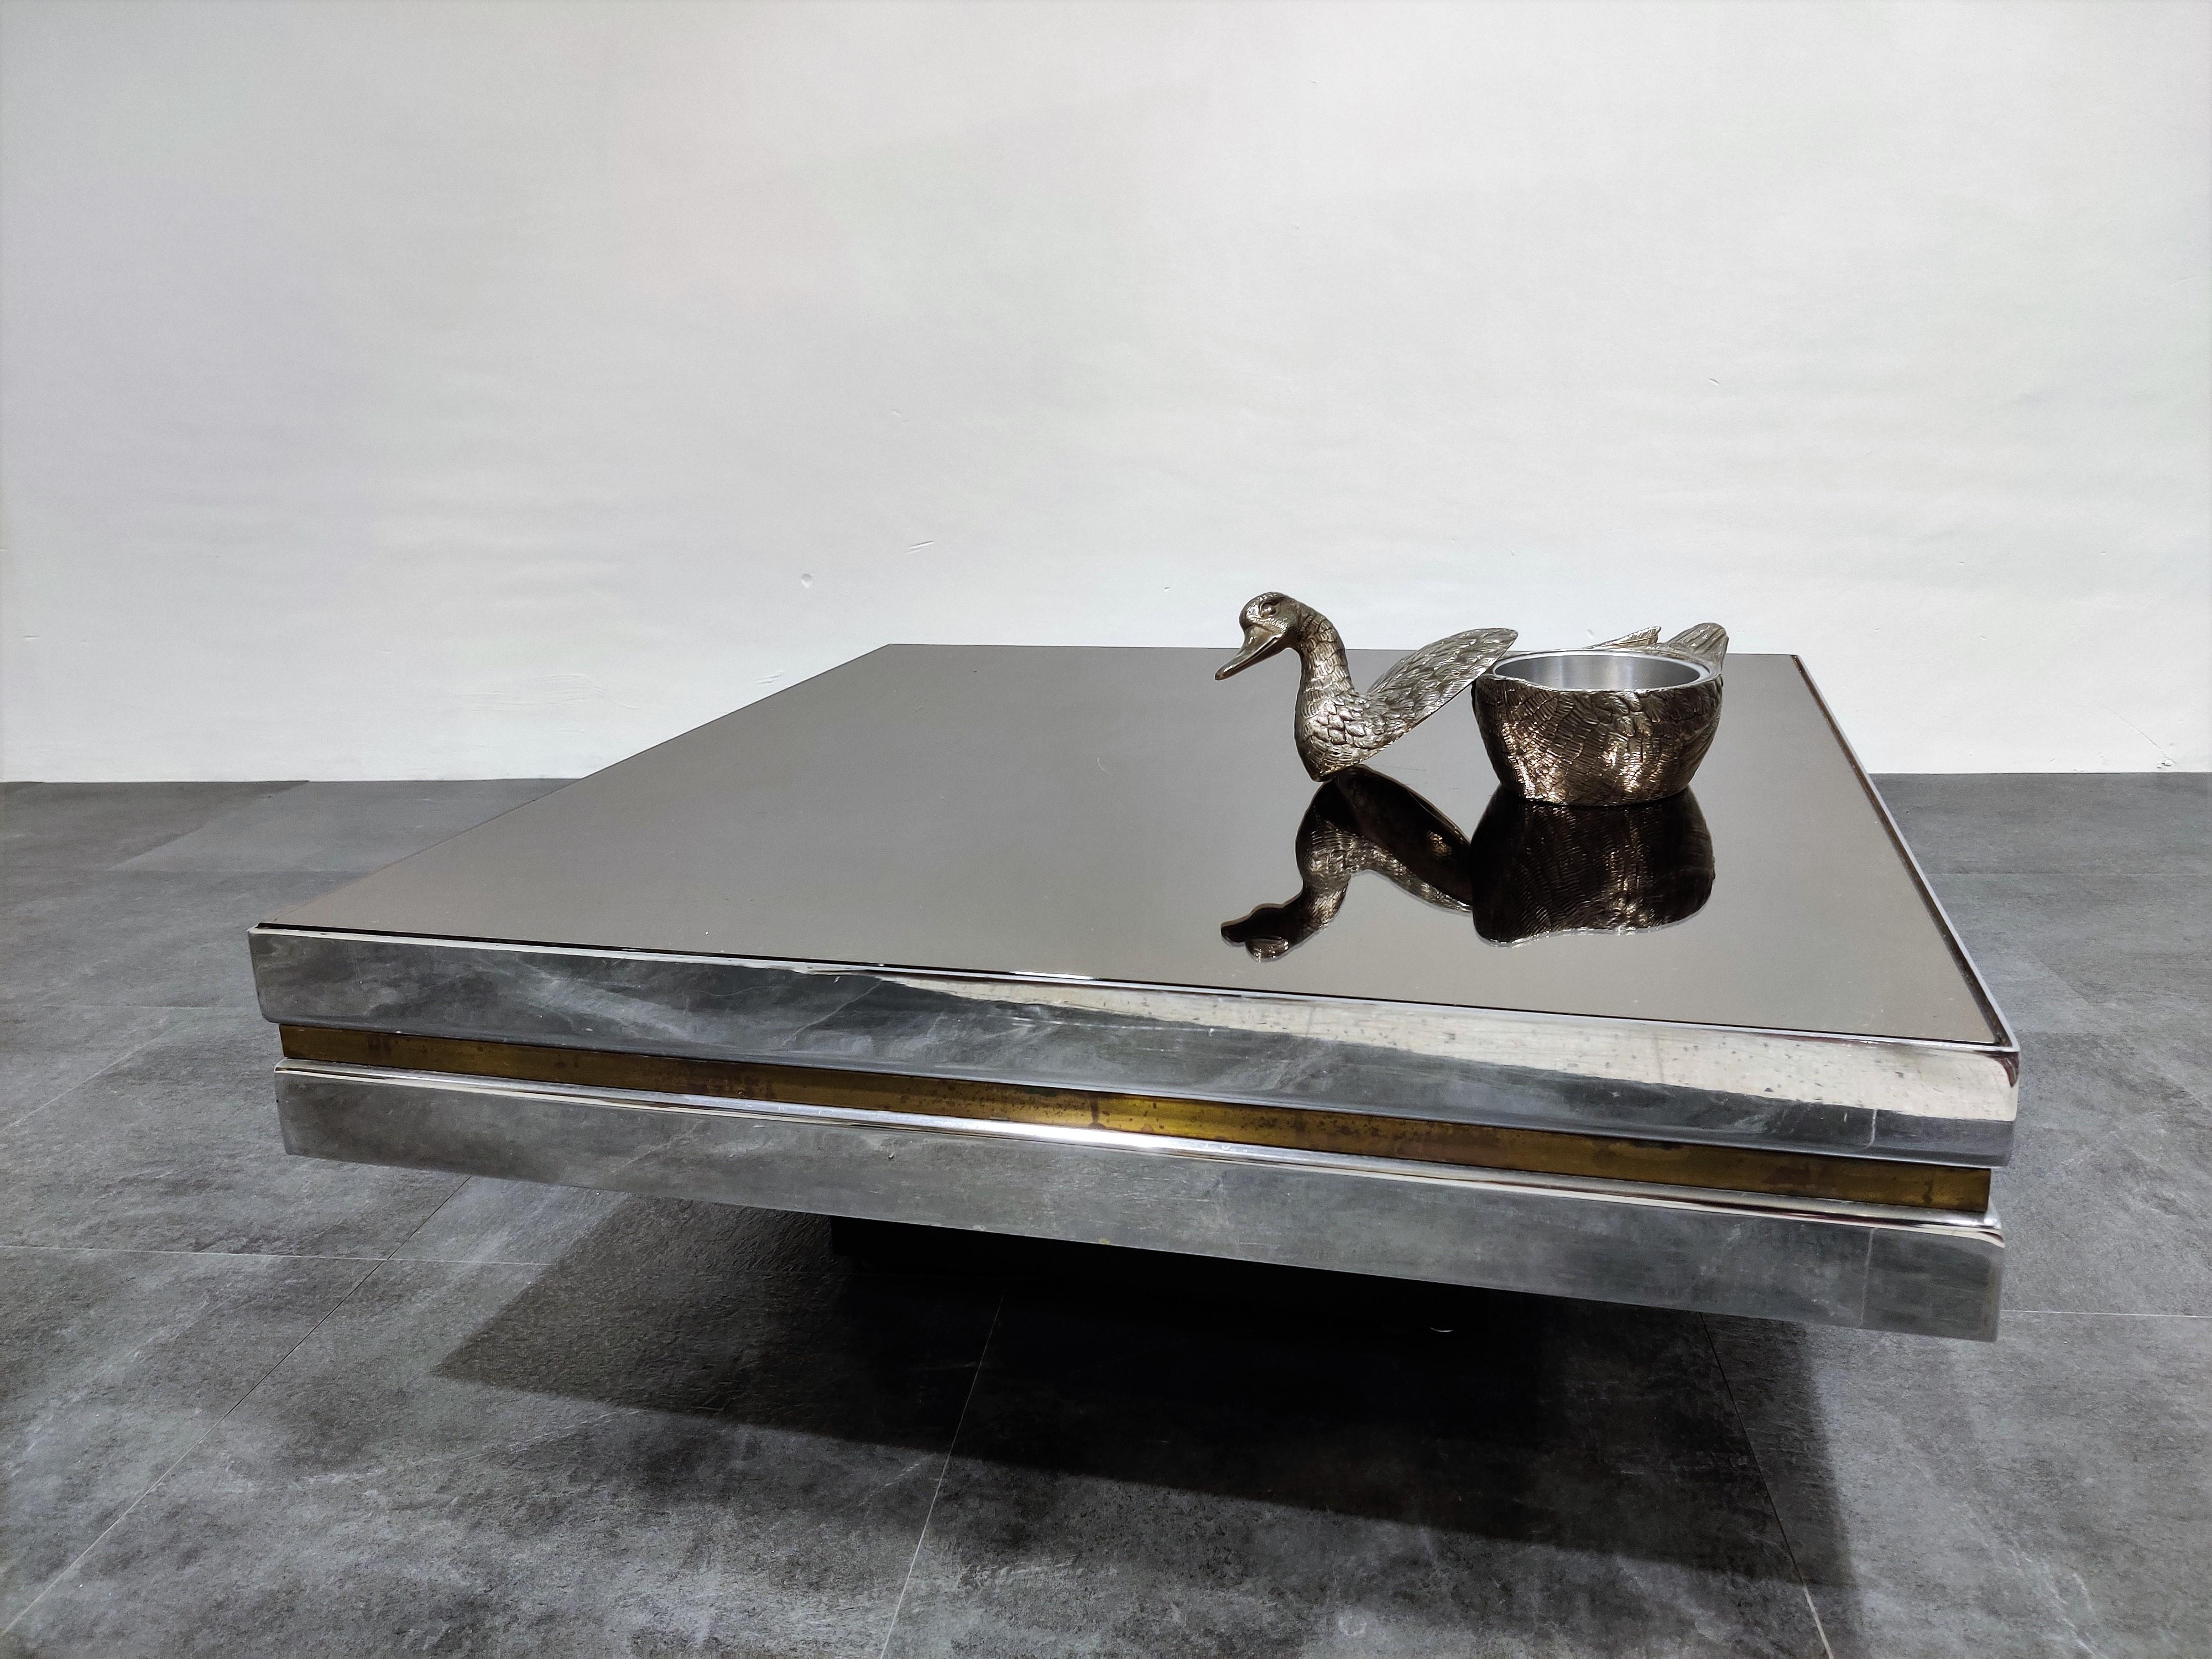 Chrome and brass coffee table with a mirrored glass top in the style of Willy Rizzo or Romeo Rega

Hollywood regency style.

Condition: Patina on the brass/chrome, original glass top with minor scratches

1970s - Belgium

Dimensions:
Height